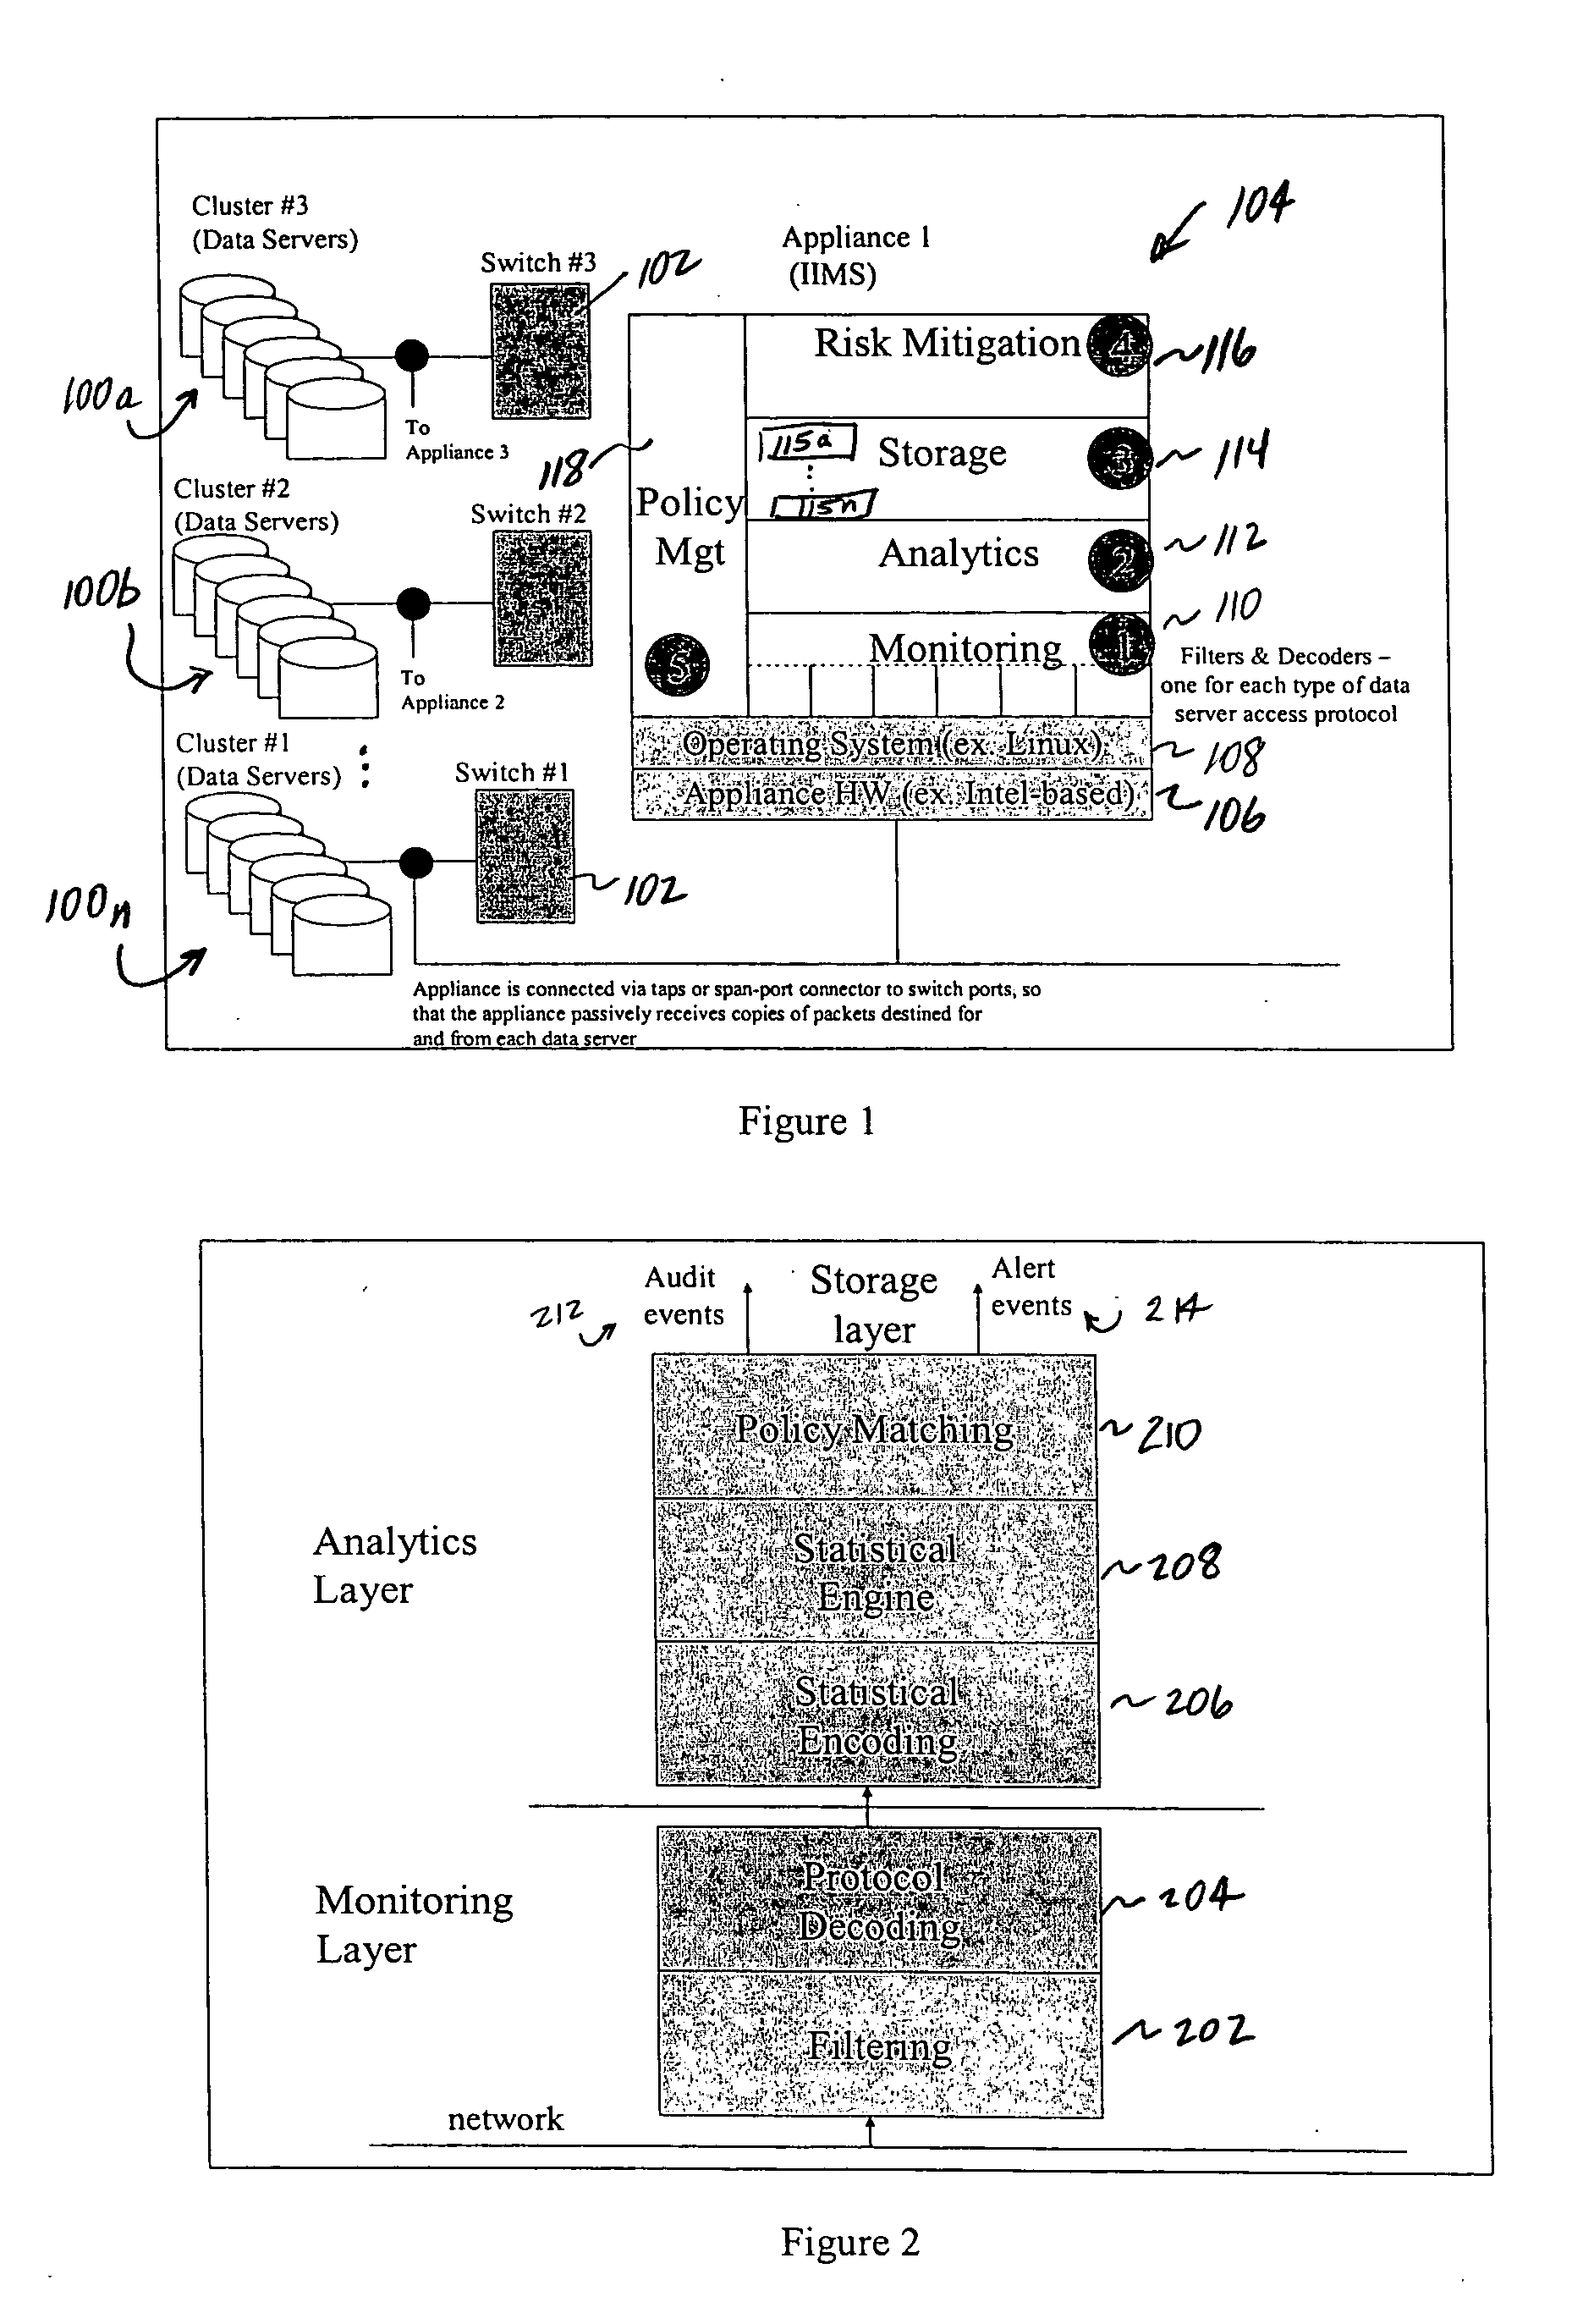 Method of and system for enterprise information asset protection through insider attack specification, monitoring and mitigation